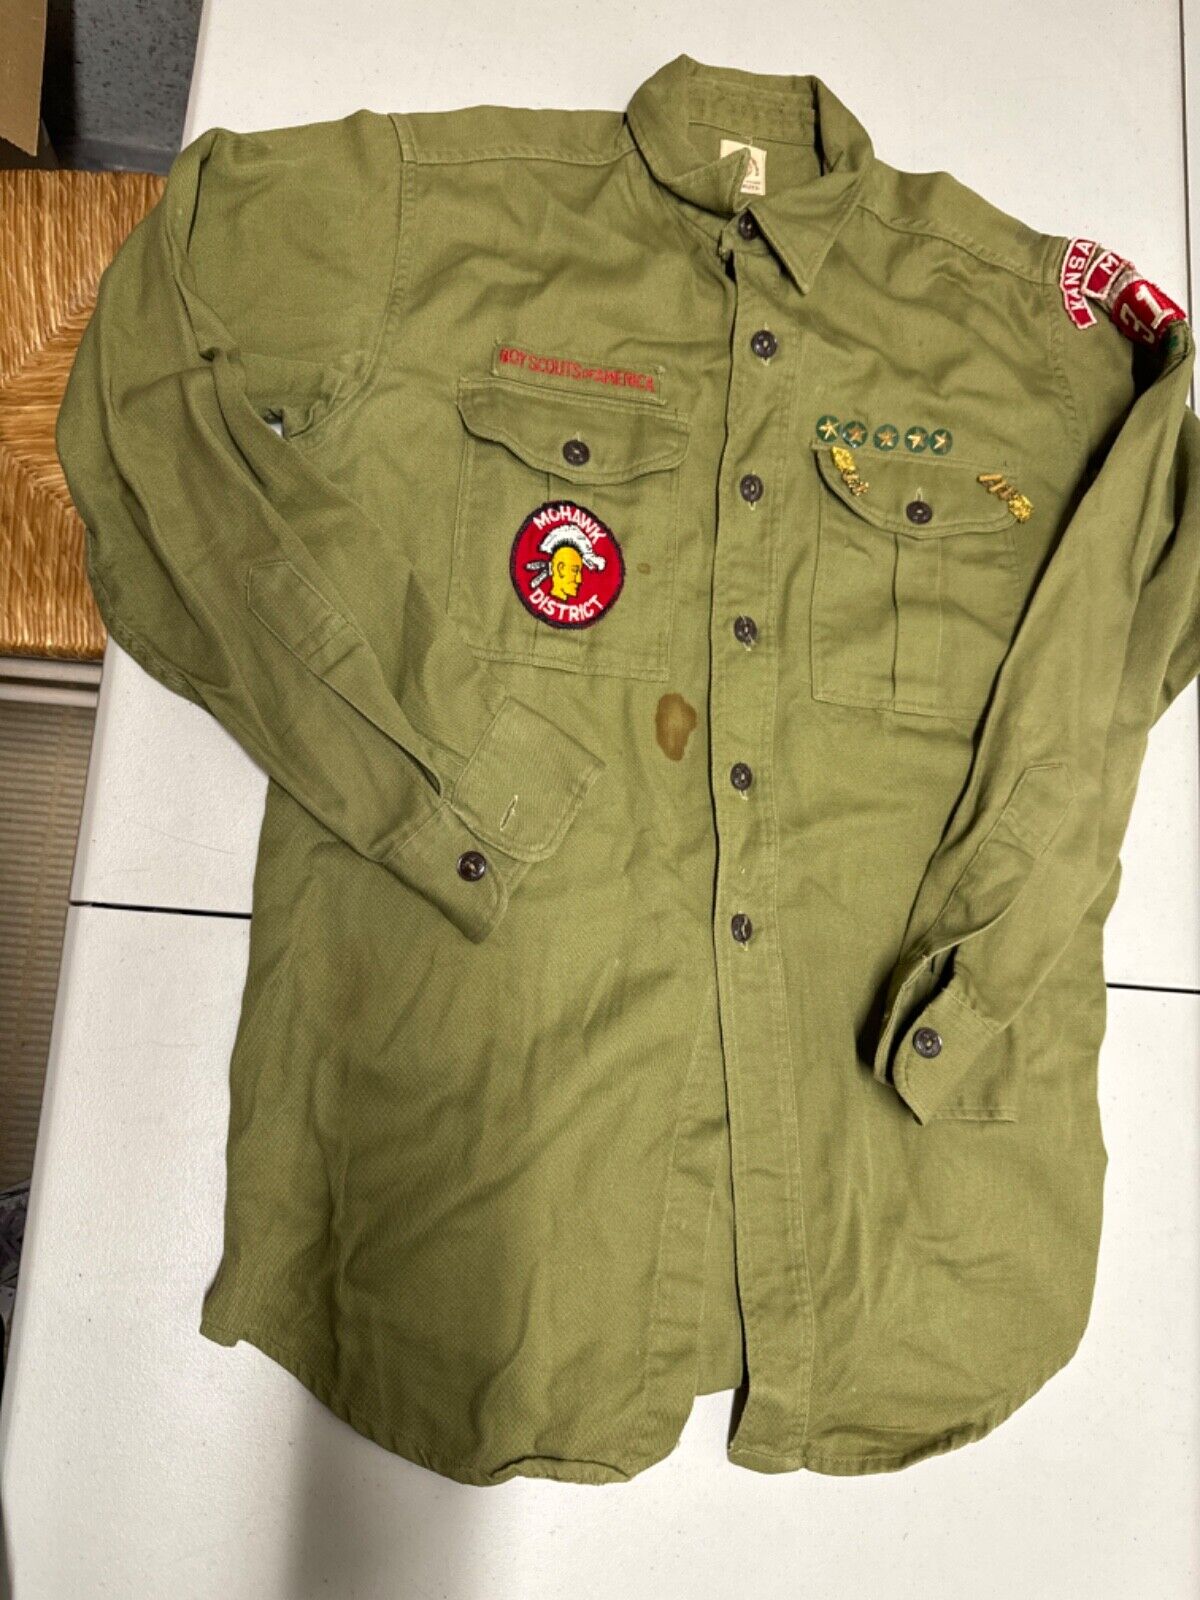 Vintage Stanforized Longsleeve Boy Scout Shirt with Pins and Patches